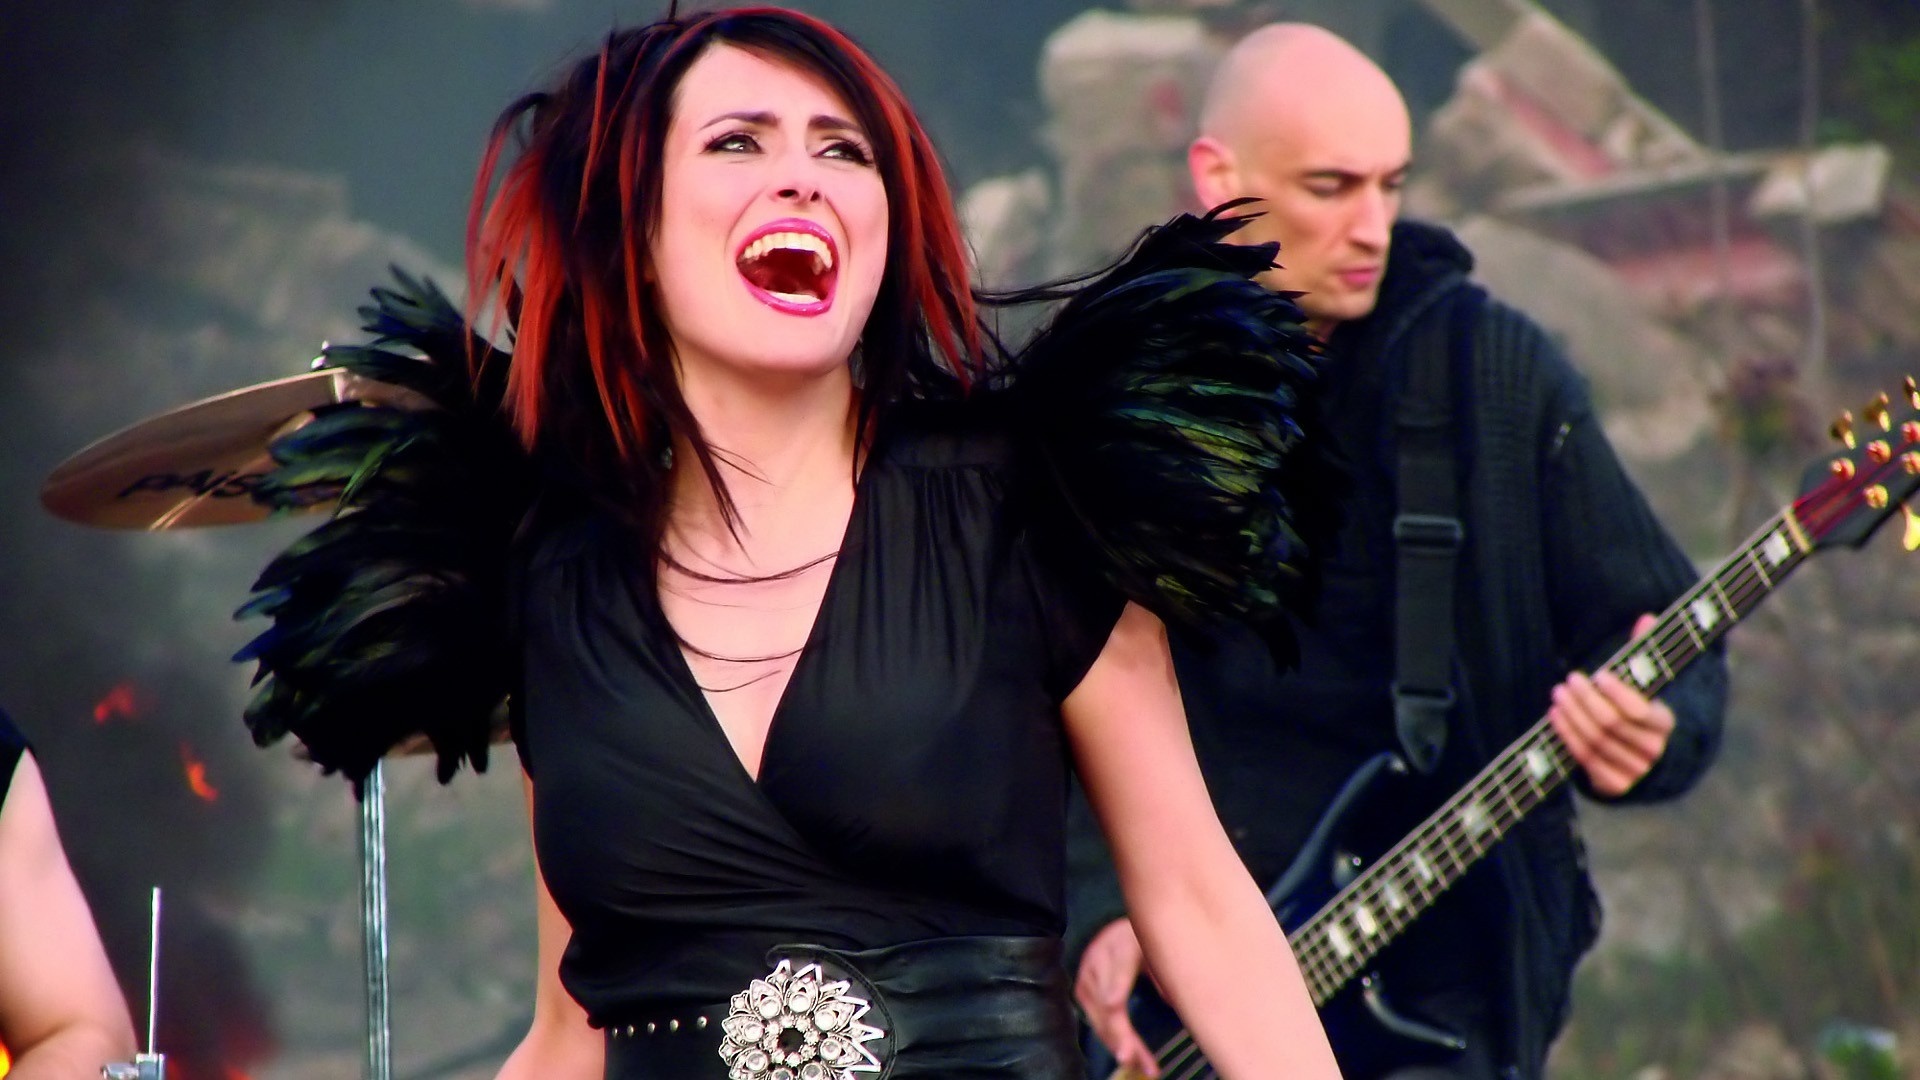 Within Temptation: A female Dutch rock and metal singer, A light and lyrical voice. 1920x1080 Full HD Wallpaper.